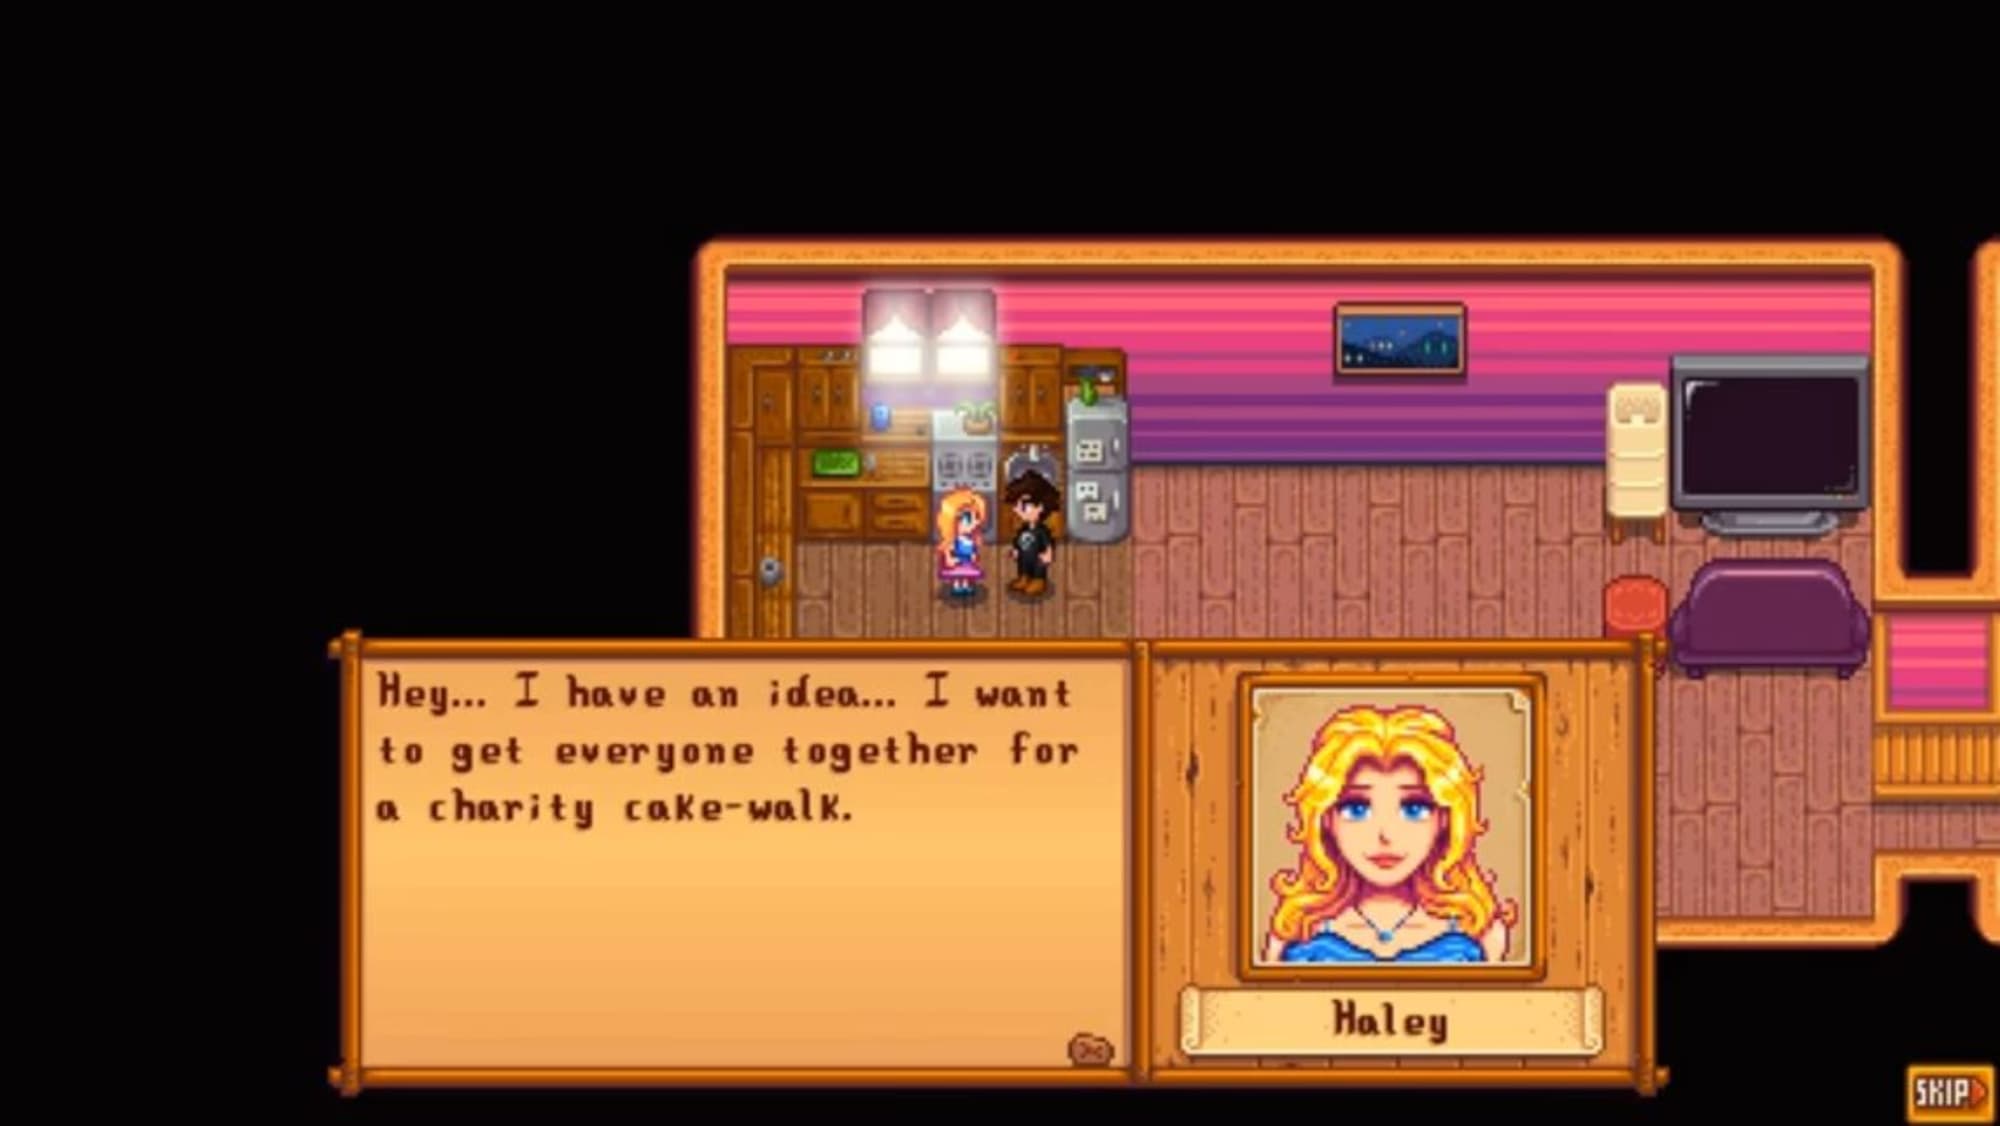 Stardew Valley 1 4 Update 14 Heart Event Walkthrough For Every Spouse Page 5